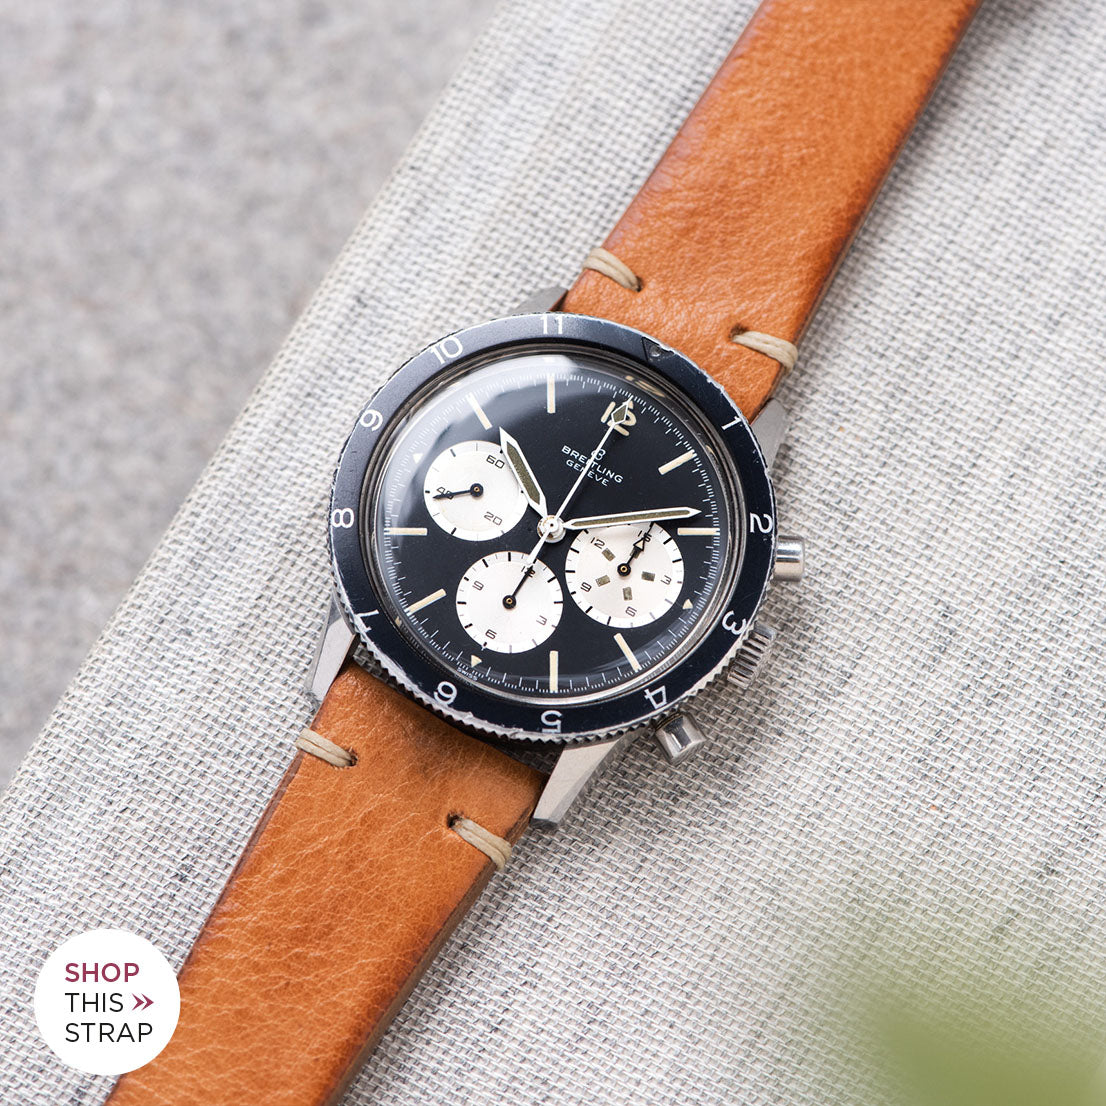 Bulang and Sons_Strap Guide_The Breitling Co-Pilot 7650 Chronograph_Caramel Brown Leather Watch Strap